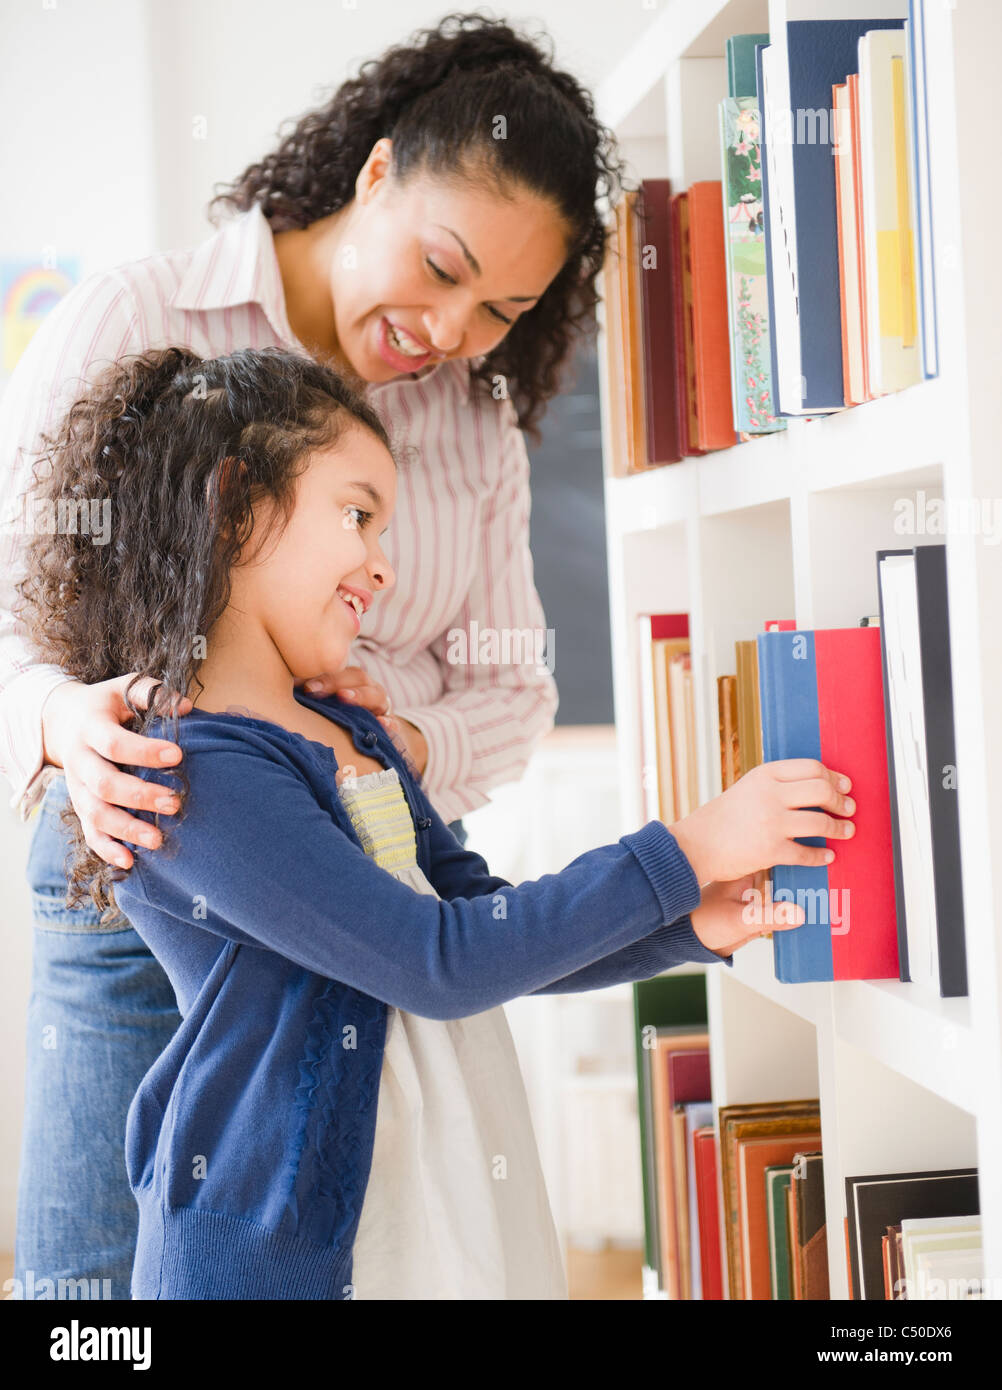 Mother helping daughter choose book on shelf Stock Photo